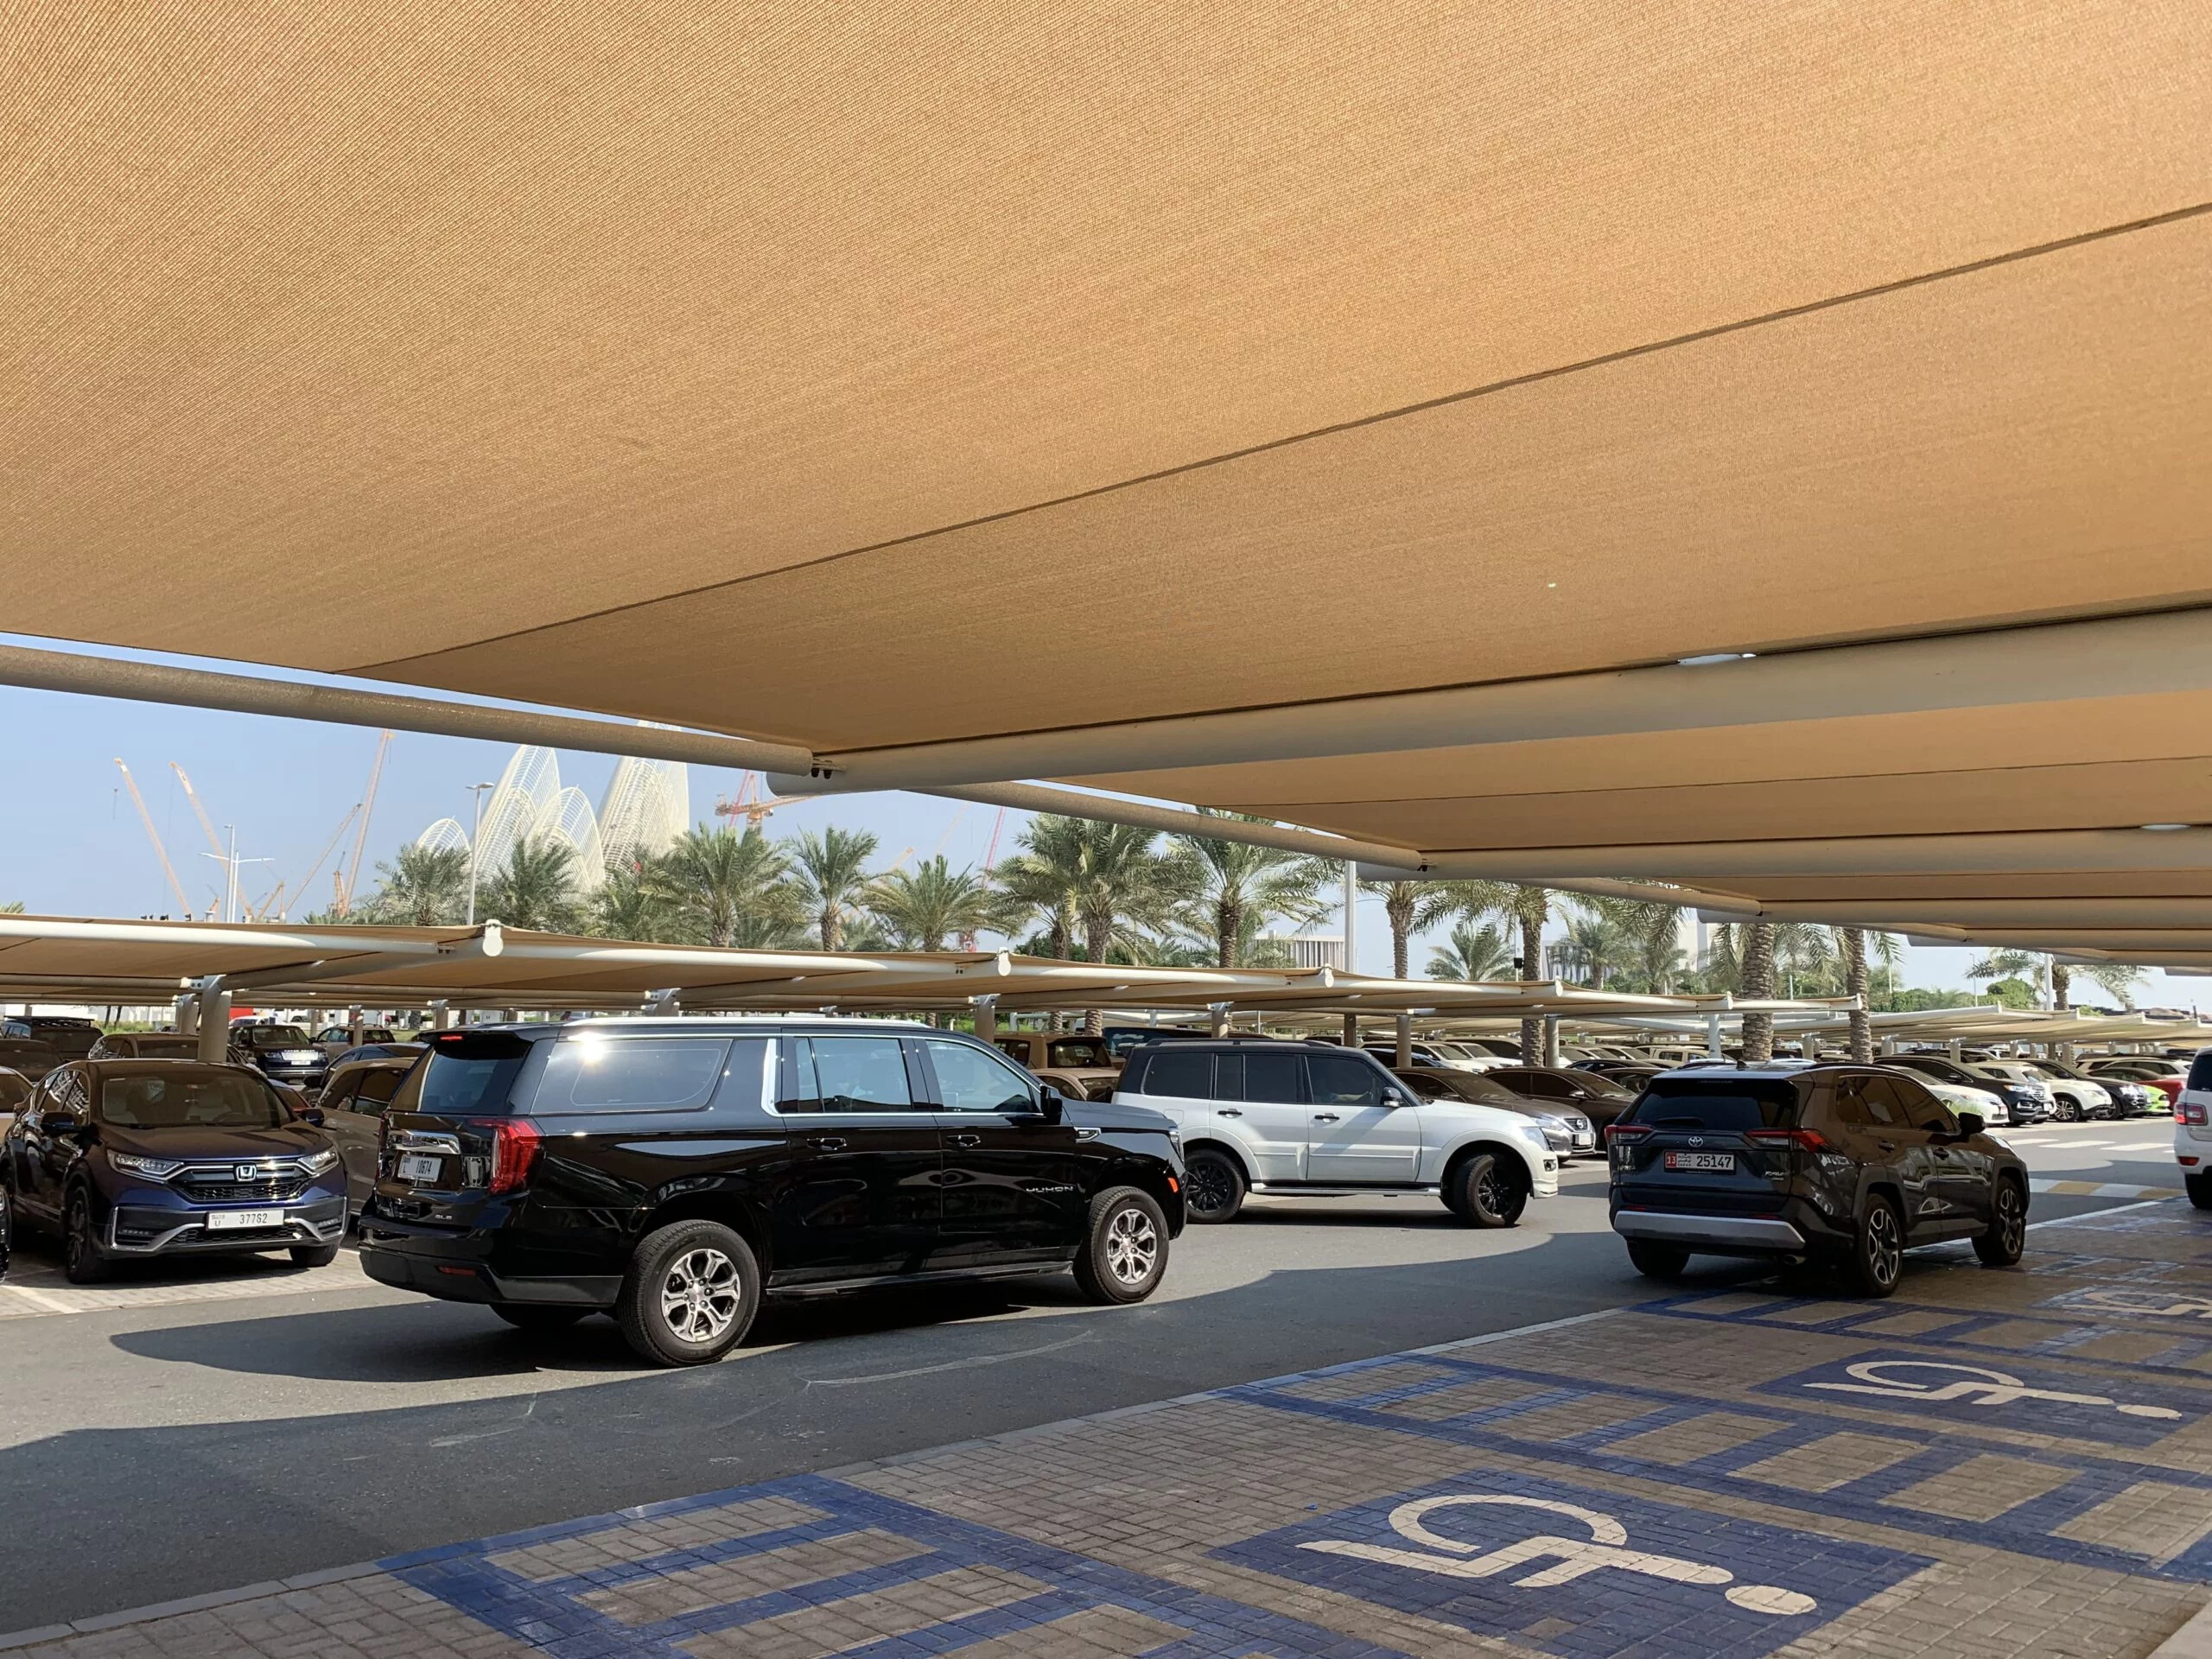 free shaded parking at Louvre Abu Dhabi Museum